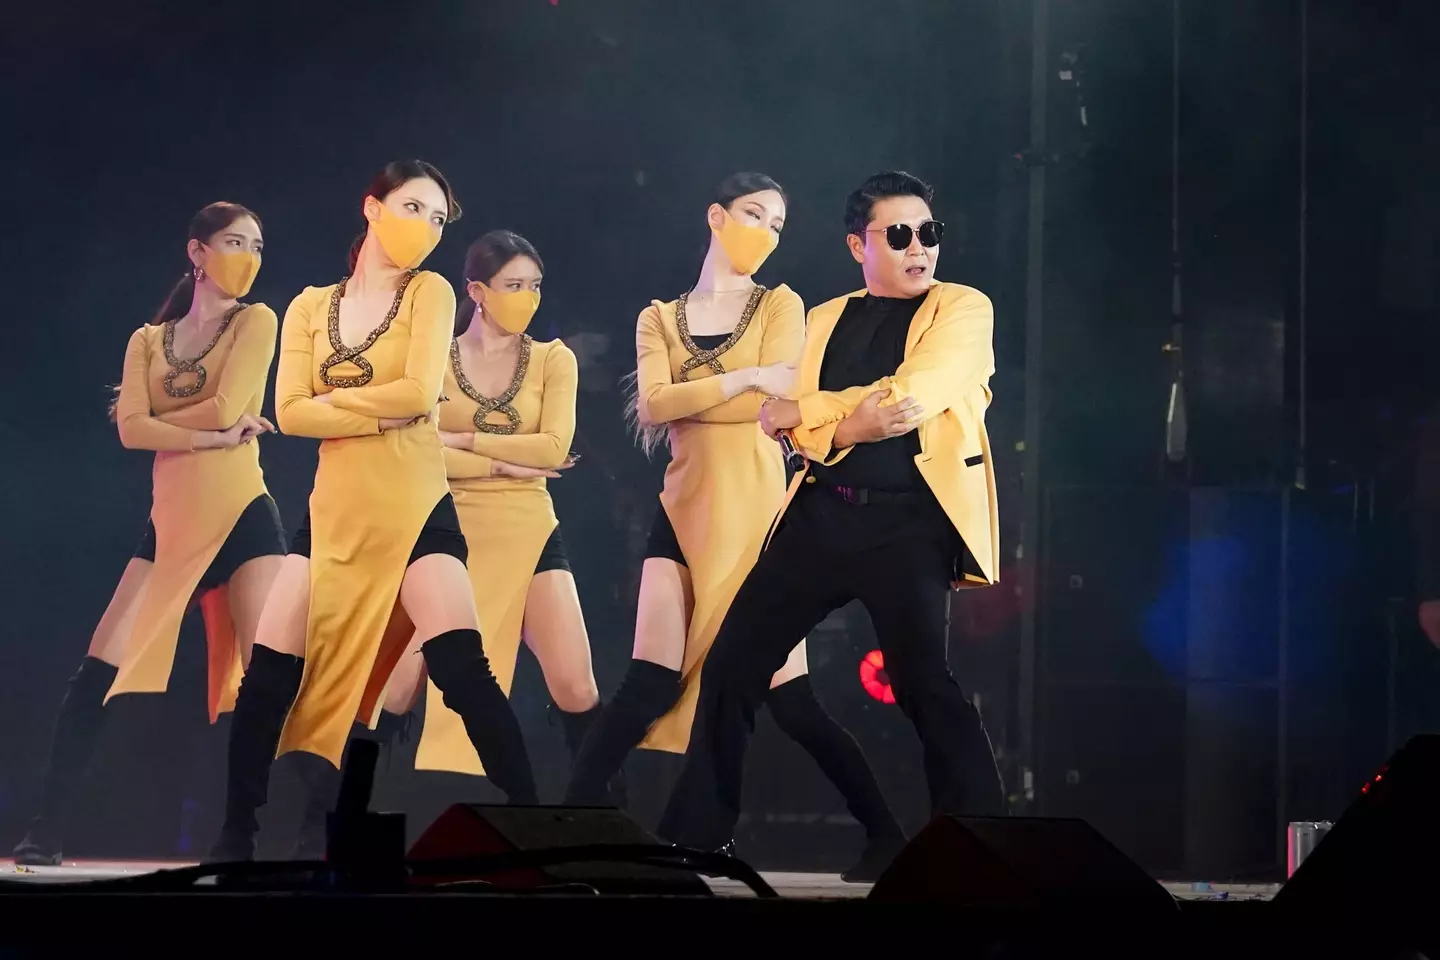 Psy performing at the World Exposition in Dubai earlier this year.